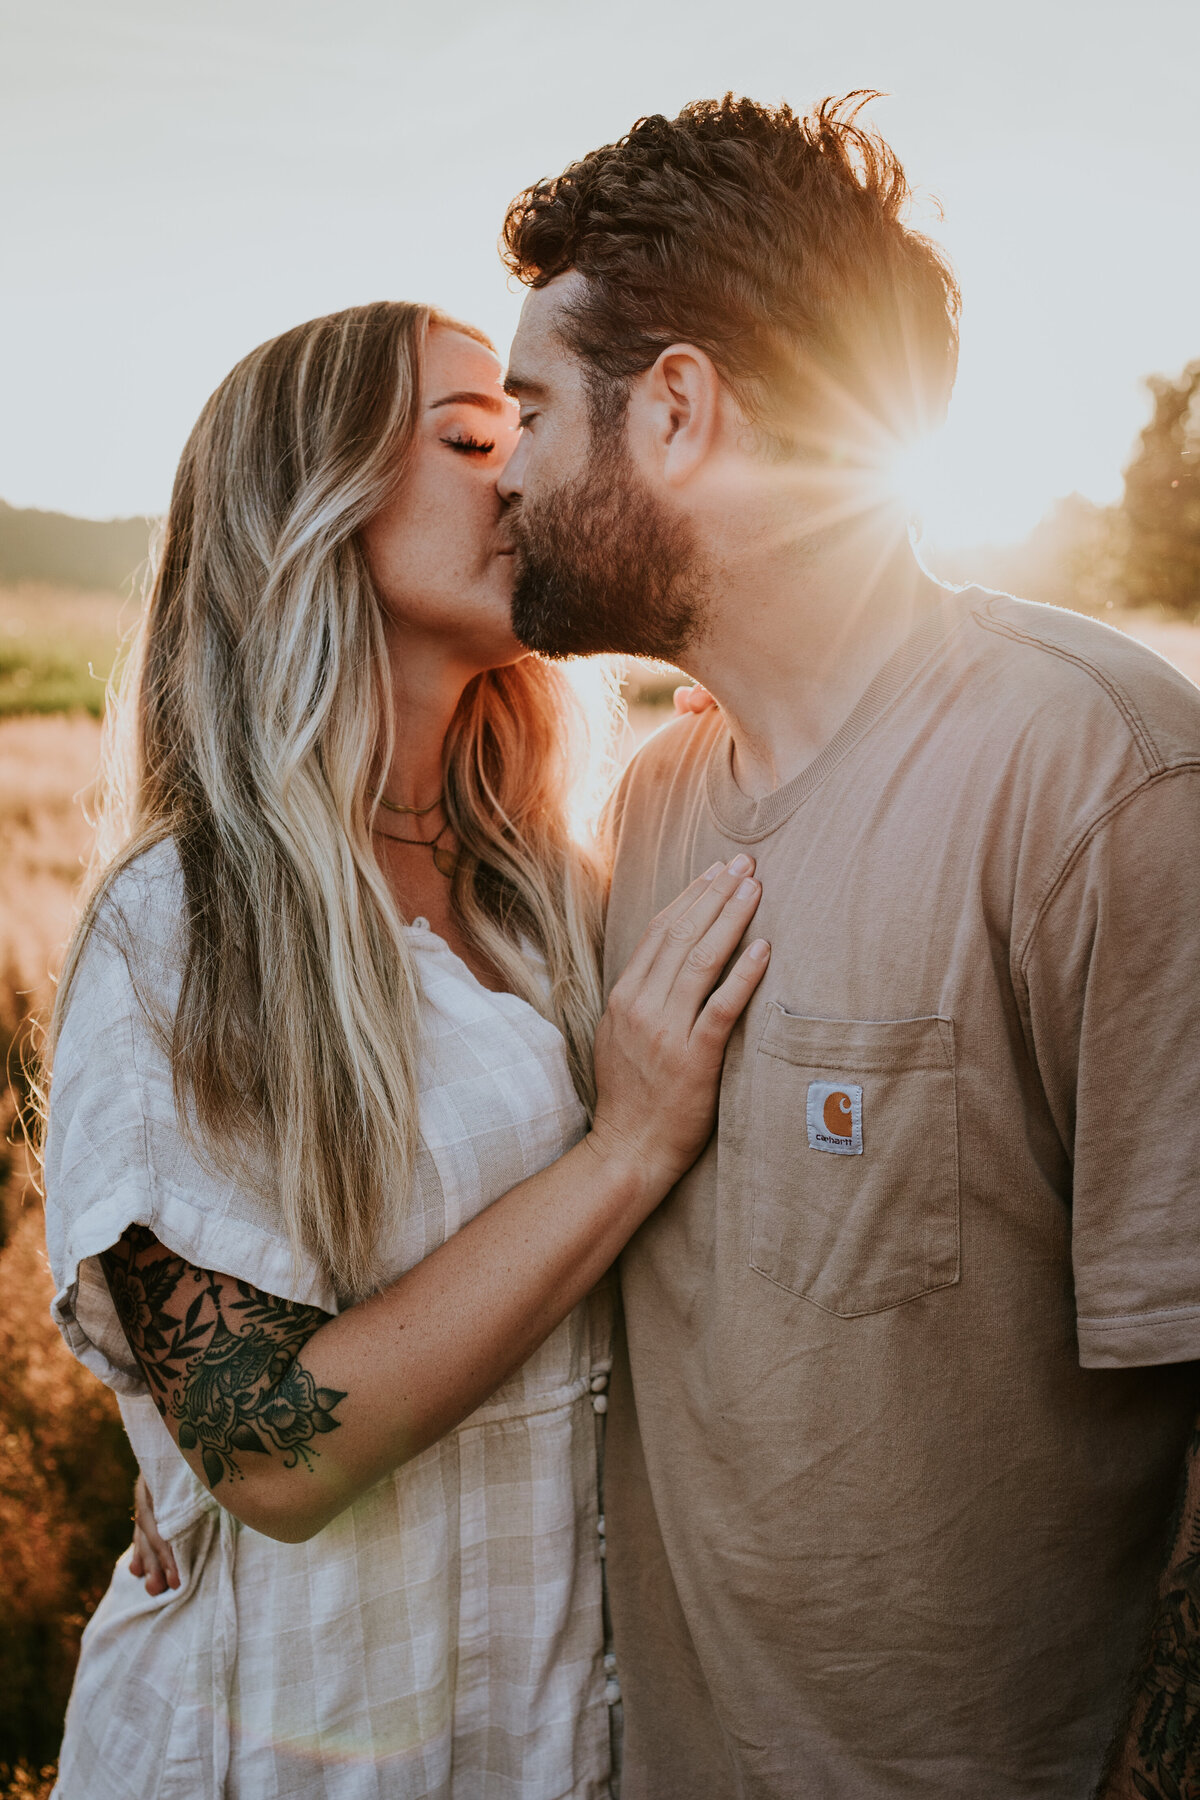 Man kisses wife in open field while sun sets behind them.